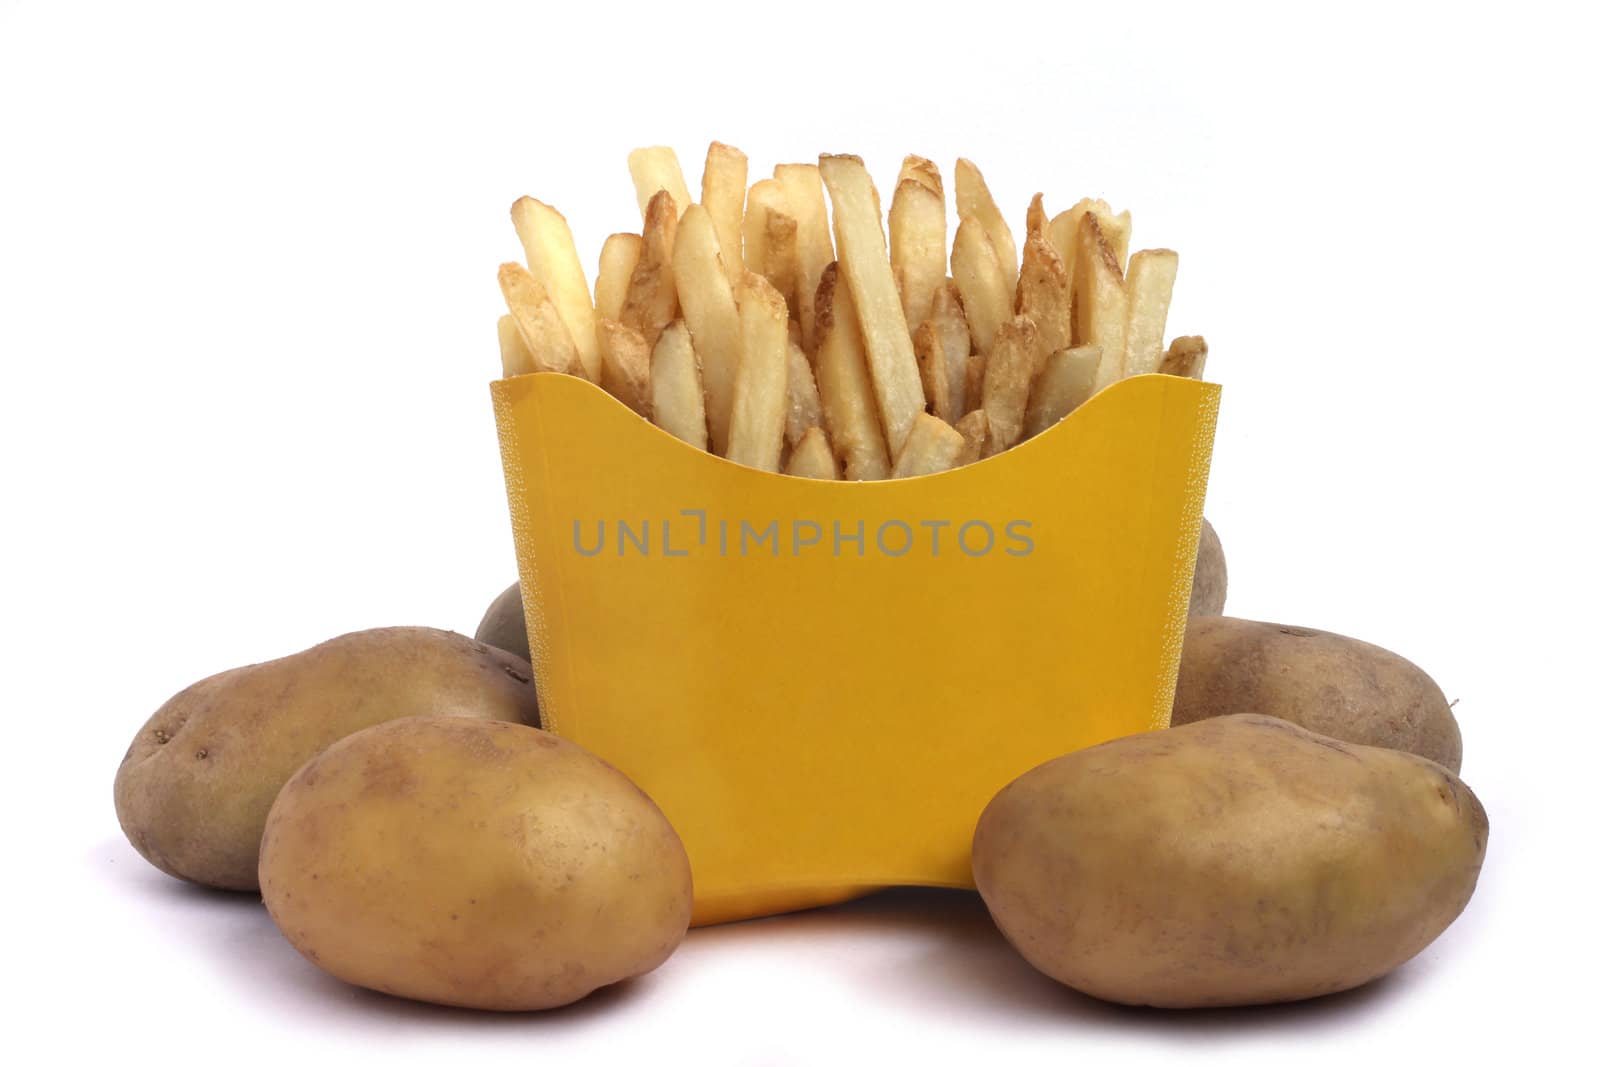 Natural french fries and potatoes concept  isolated on white